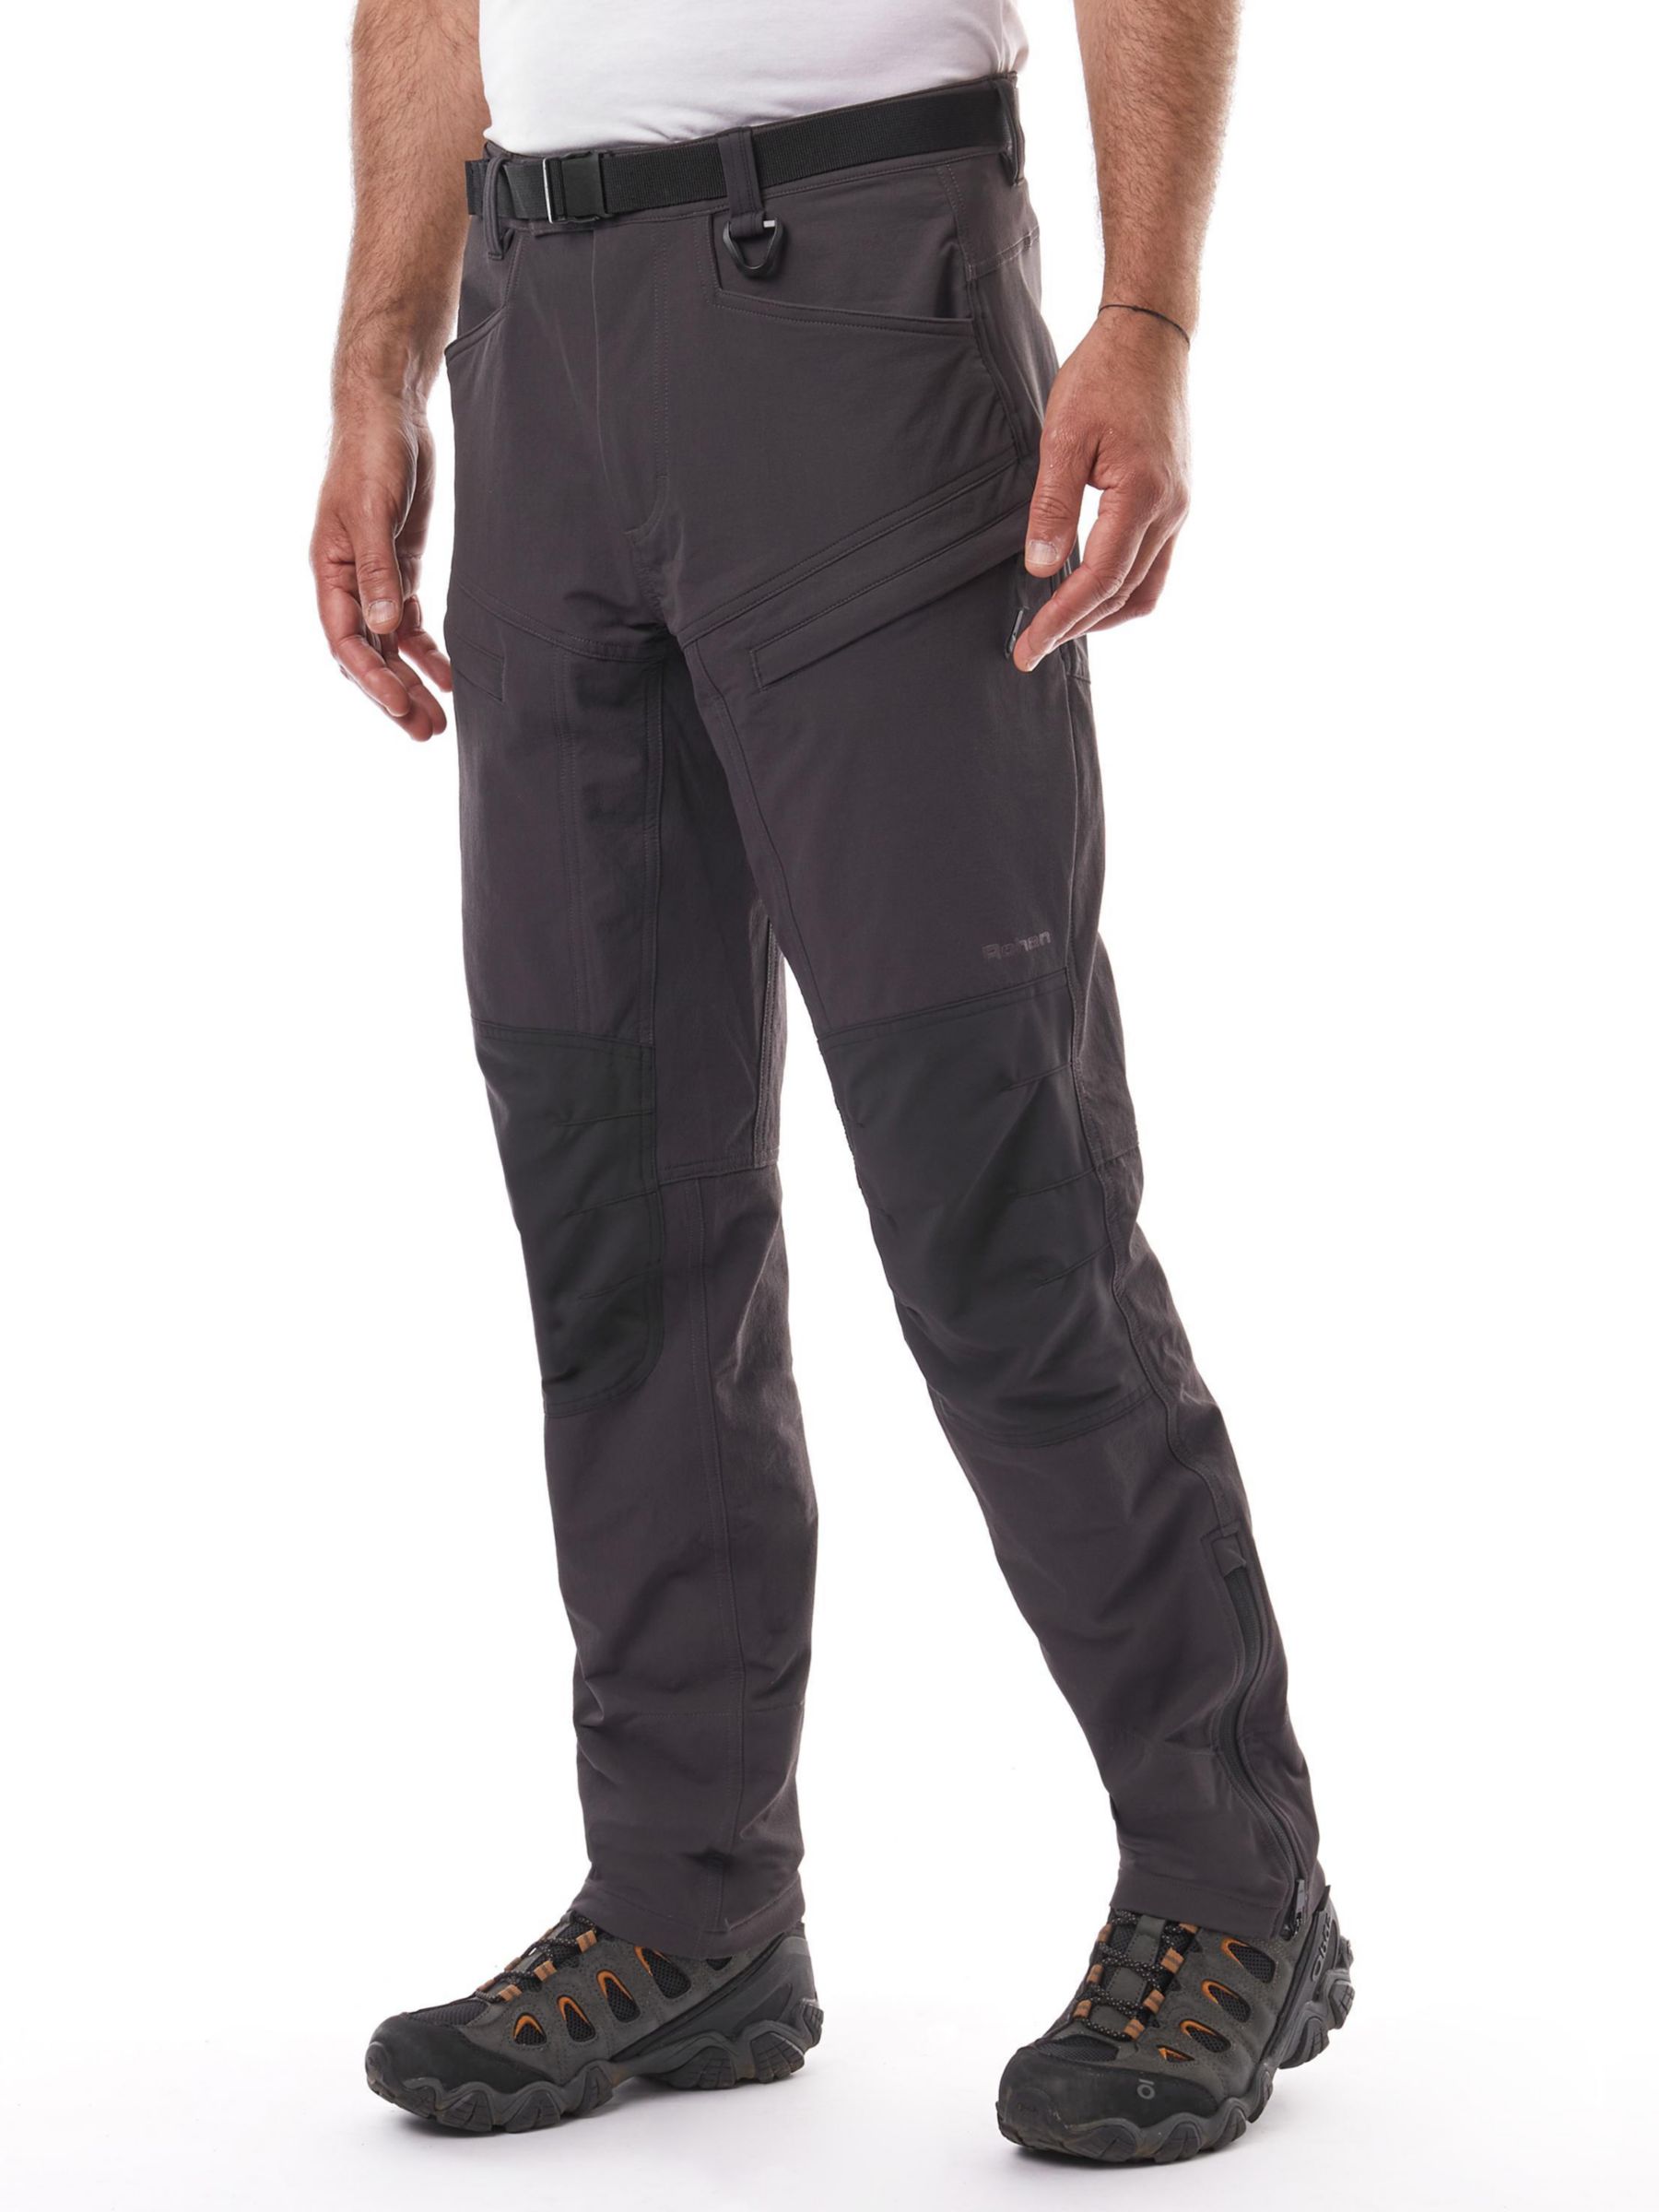 Rohan Fjell Hiking Trousers, Carbon/Black, 30S